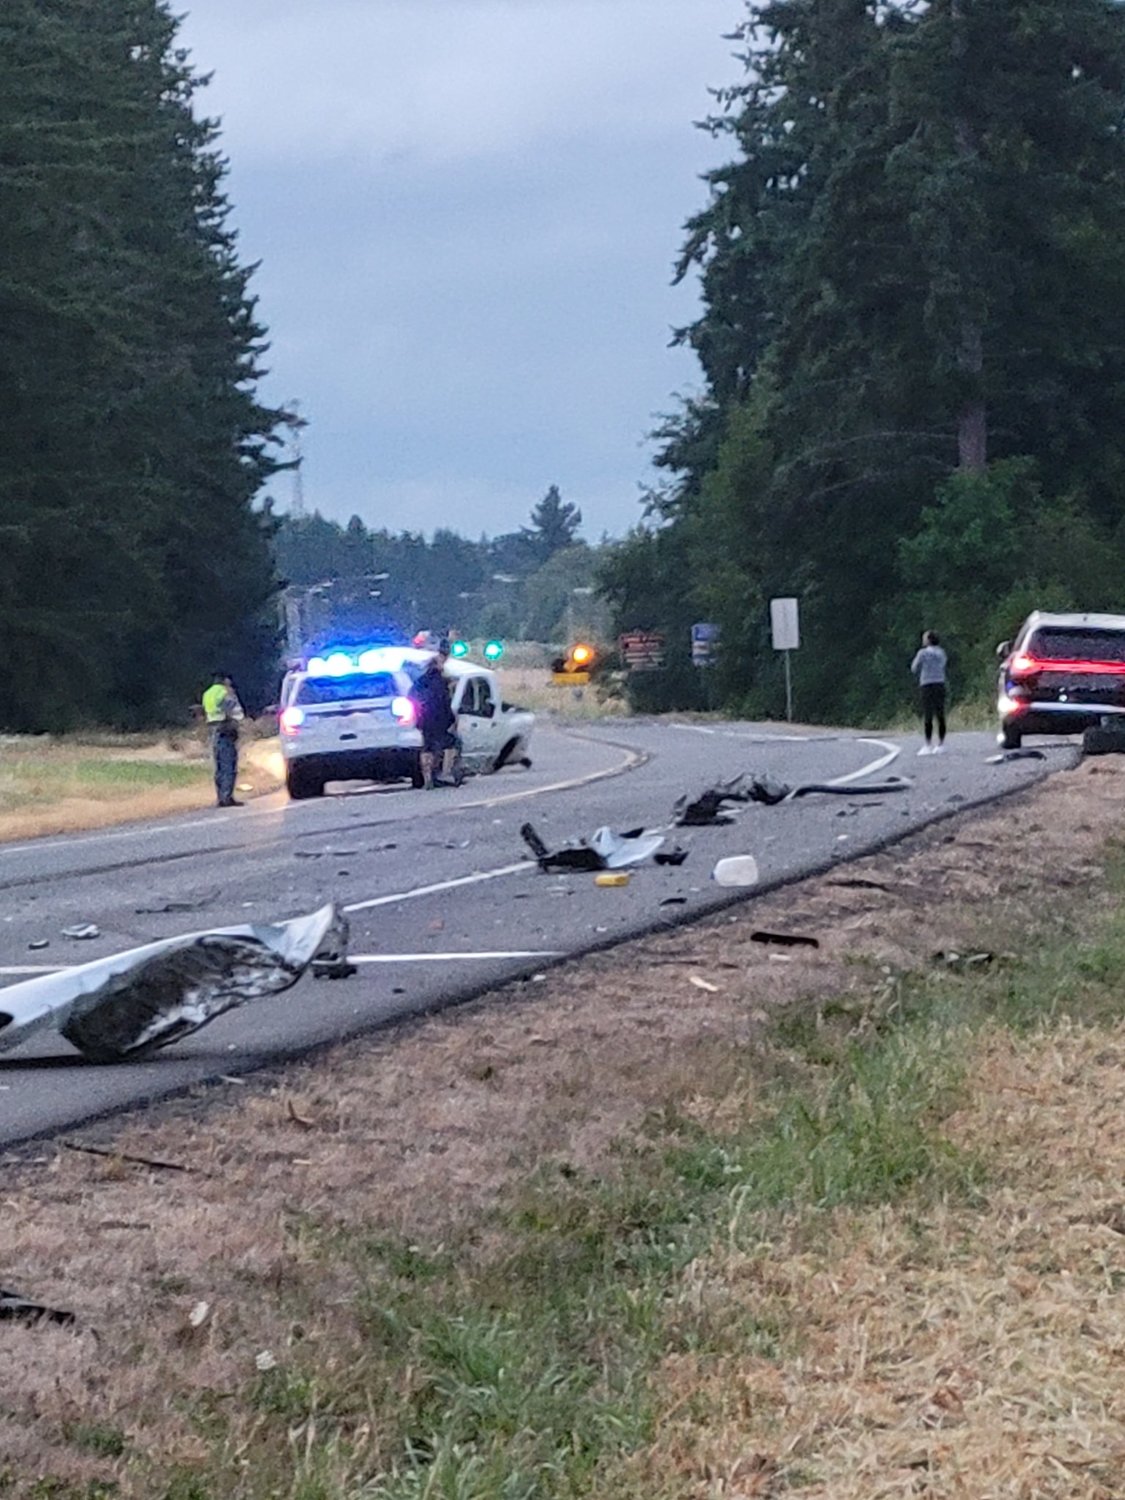 A man was airlifted to Harborview Medical Center in Seattle after he fell asleep at the wheel and crashed into a pickup truck on U.S. Highway 12 at mile marker 69 early Wednesday morning.